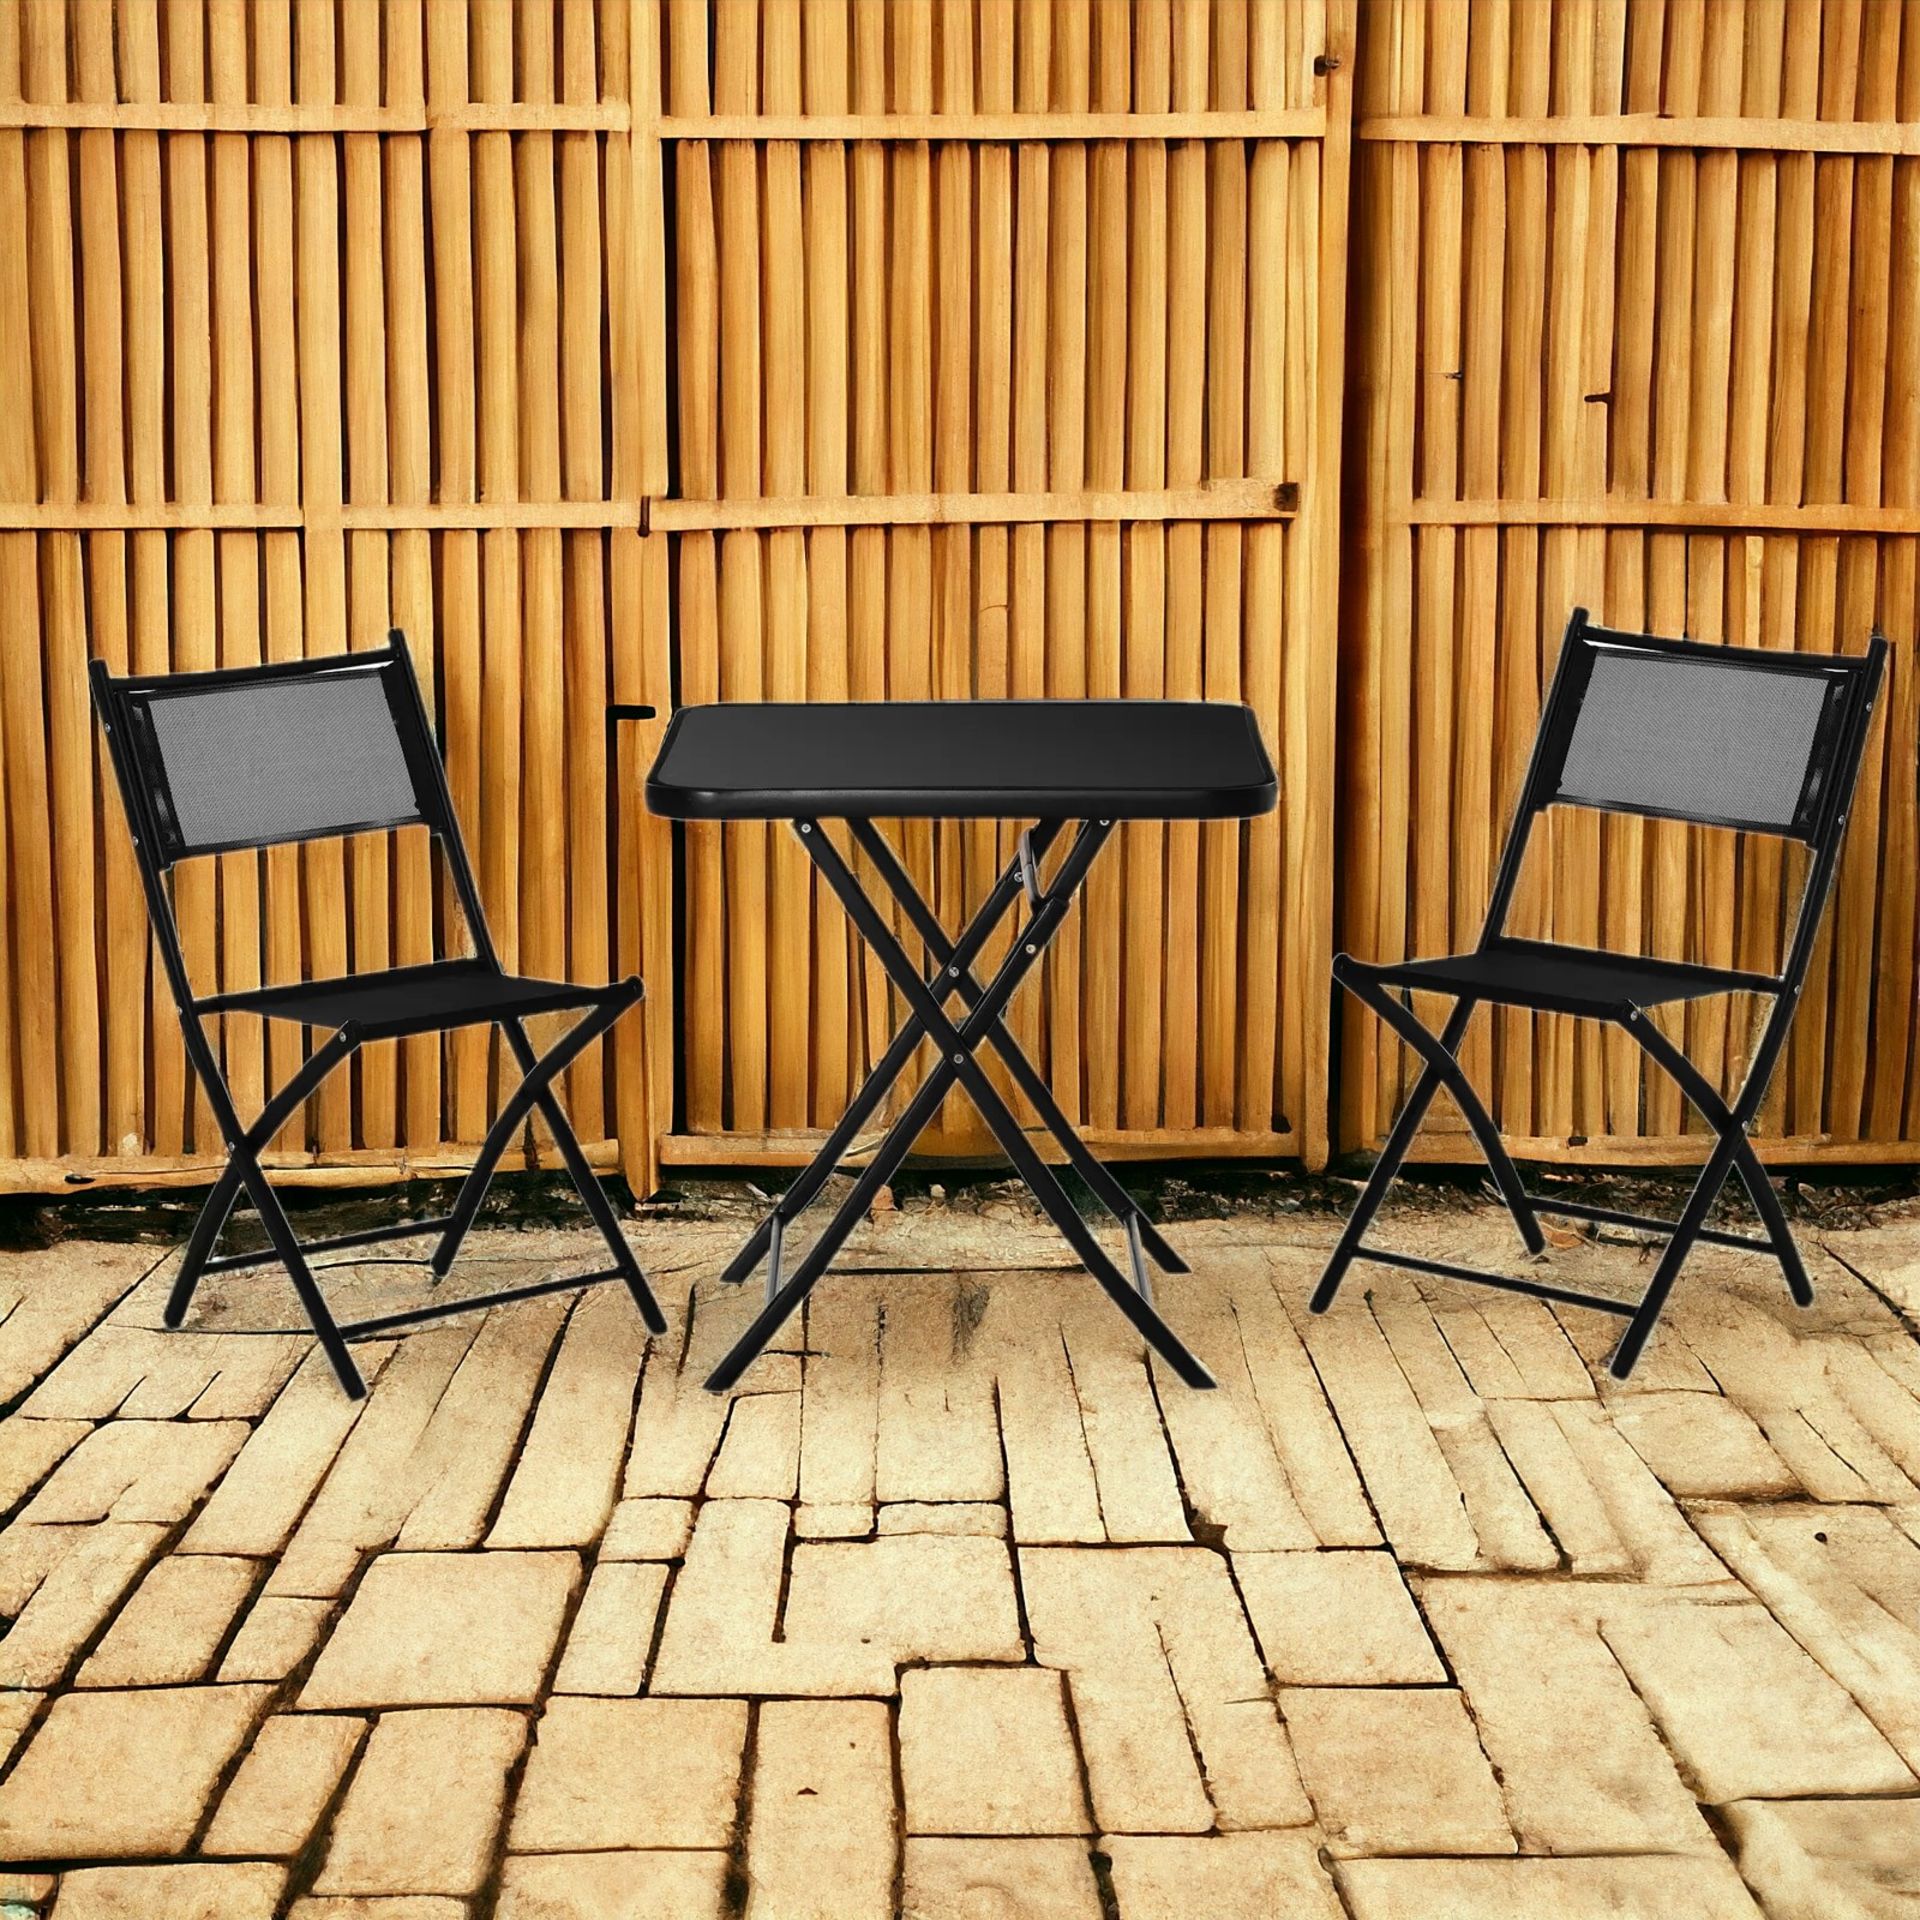 FREE DELIVERY - BRAND NEW 3PCS GARDEN BISTRO SET FOLDING TABLE AND 2 CHAIRS OUTDOOR FURNITURE - Image 2 of 2